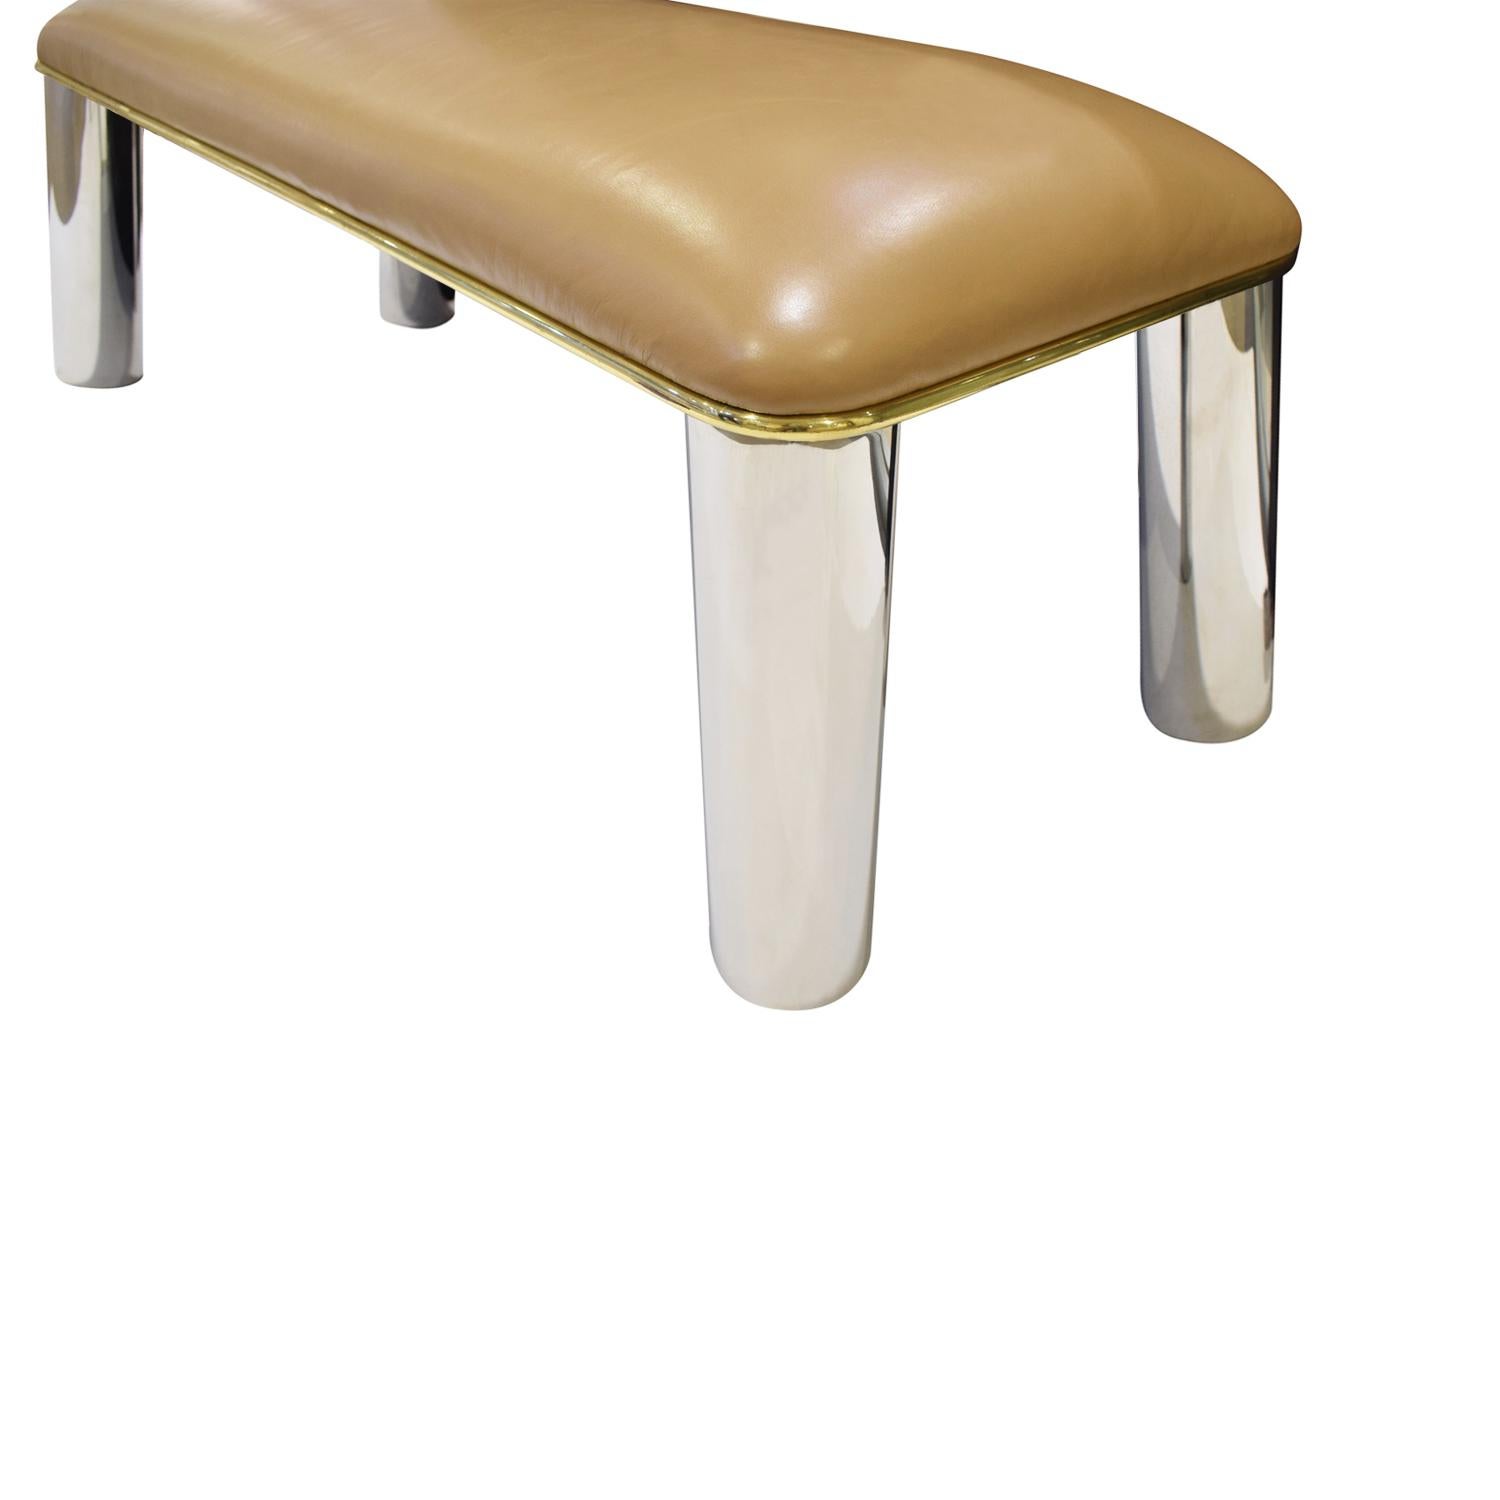 American Karl Springer Bench in Polished Stainless Steel and Brass, 1980s